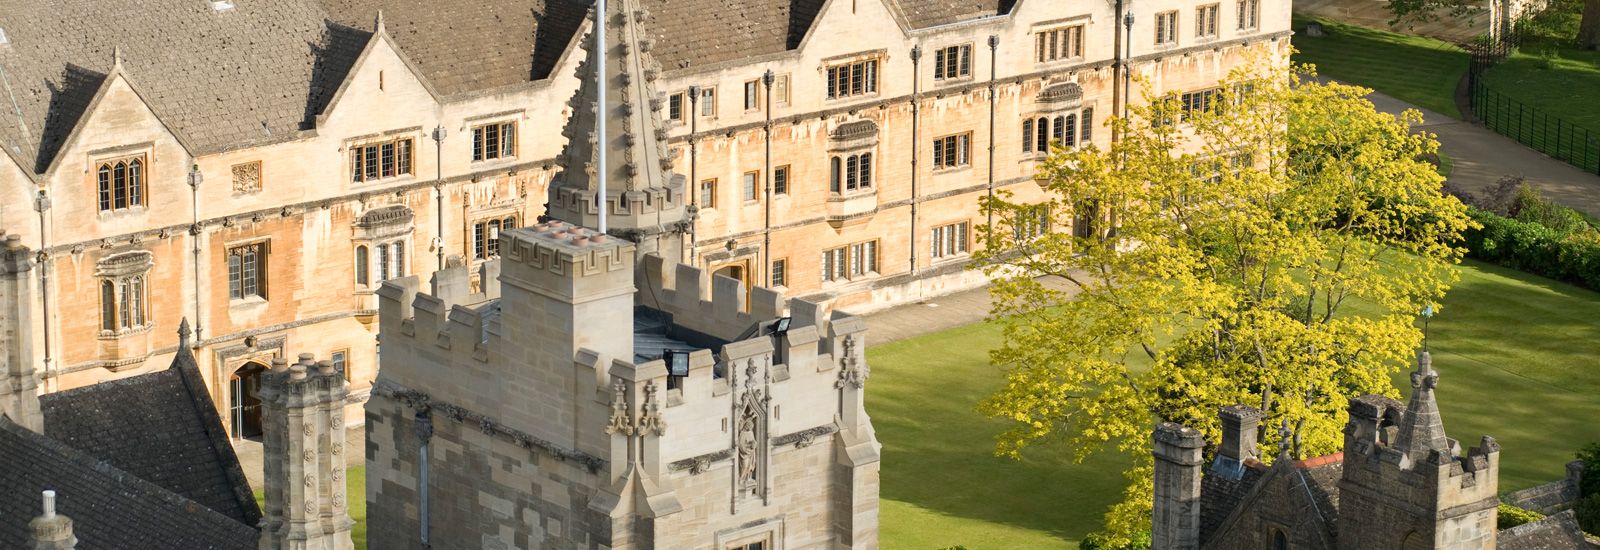 Quad and buildings in Magdalen College from above